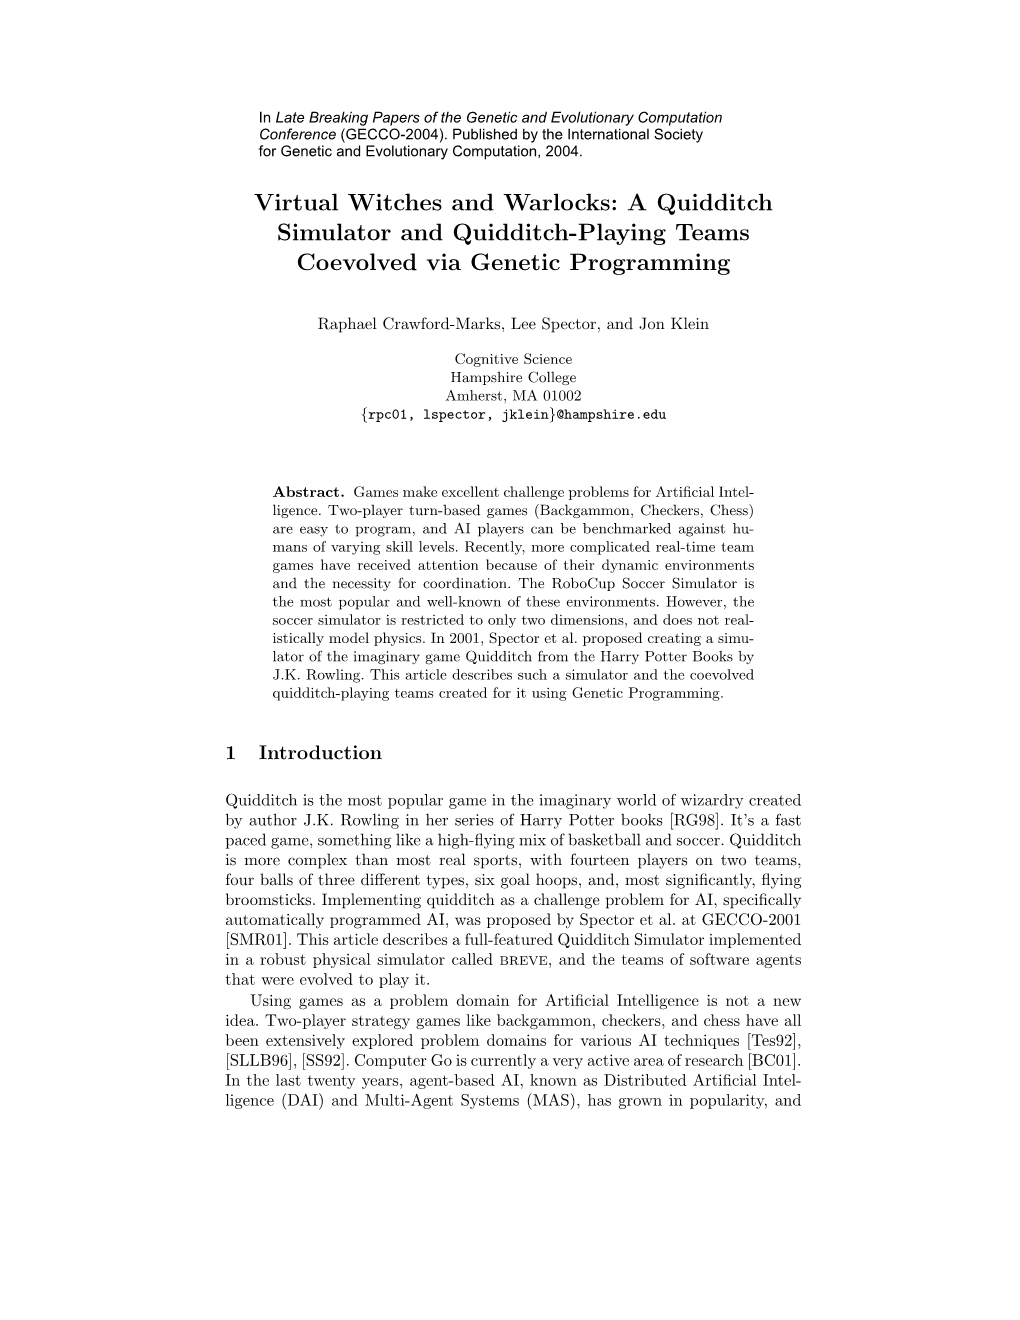 Virtual Witches and Warlocks: a Quidditch Simulator and Quidditch-Playing Teams Coevolved Via Genetic Programming